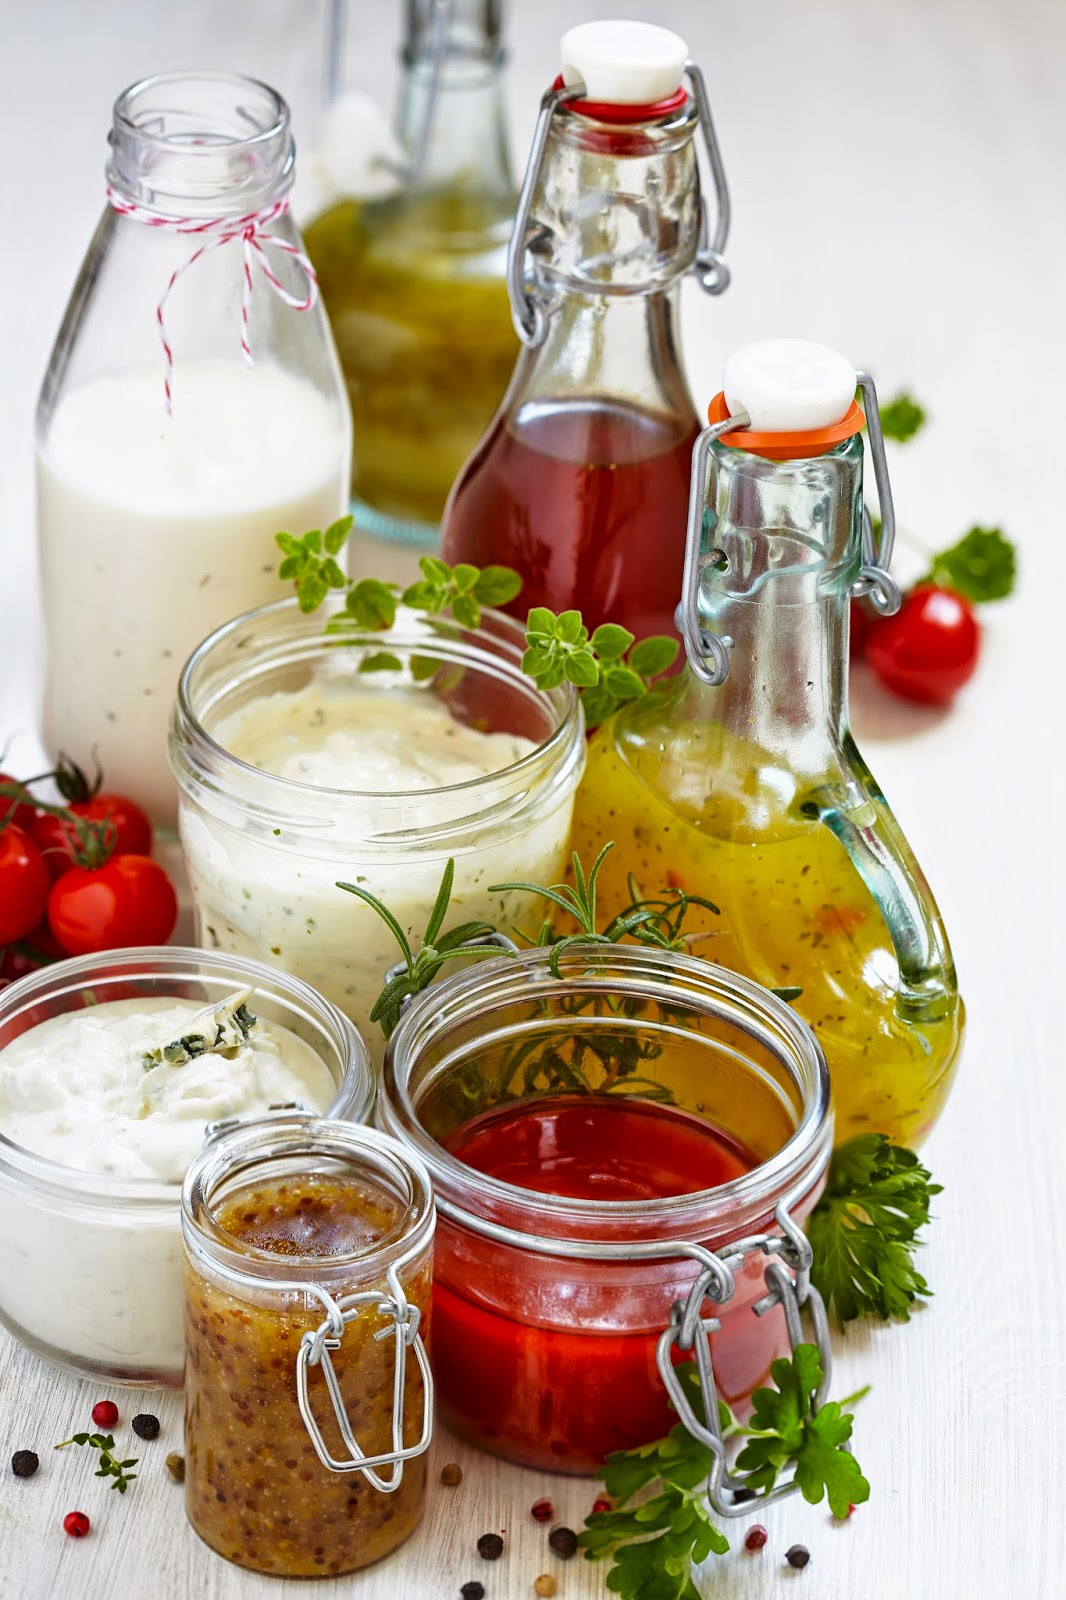 Healthiest Salad Dressings
 Passionately Raw 8 Healthy Easy to Make Raw Salad Dressings